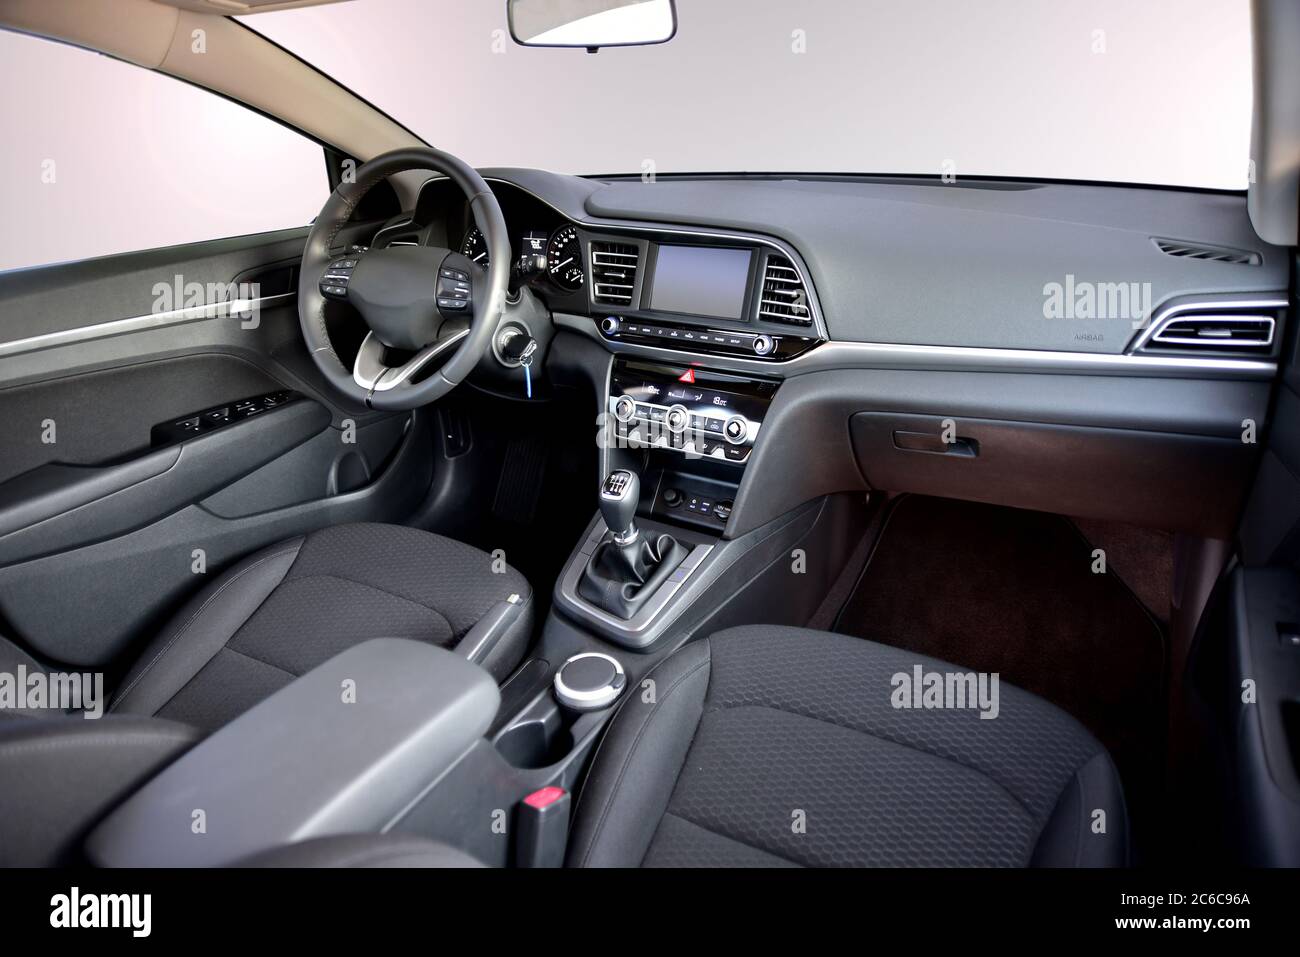 Car interior. The inside of the car, front view. Dashboard of a modern car. Stock Photo